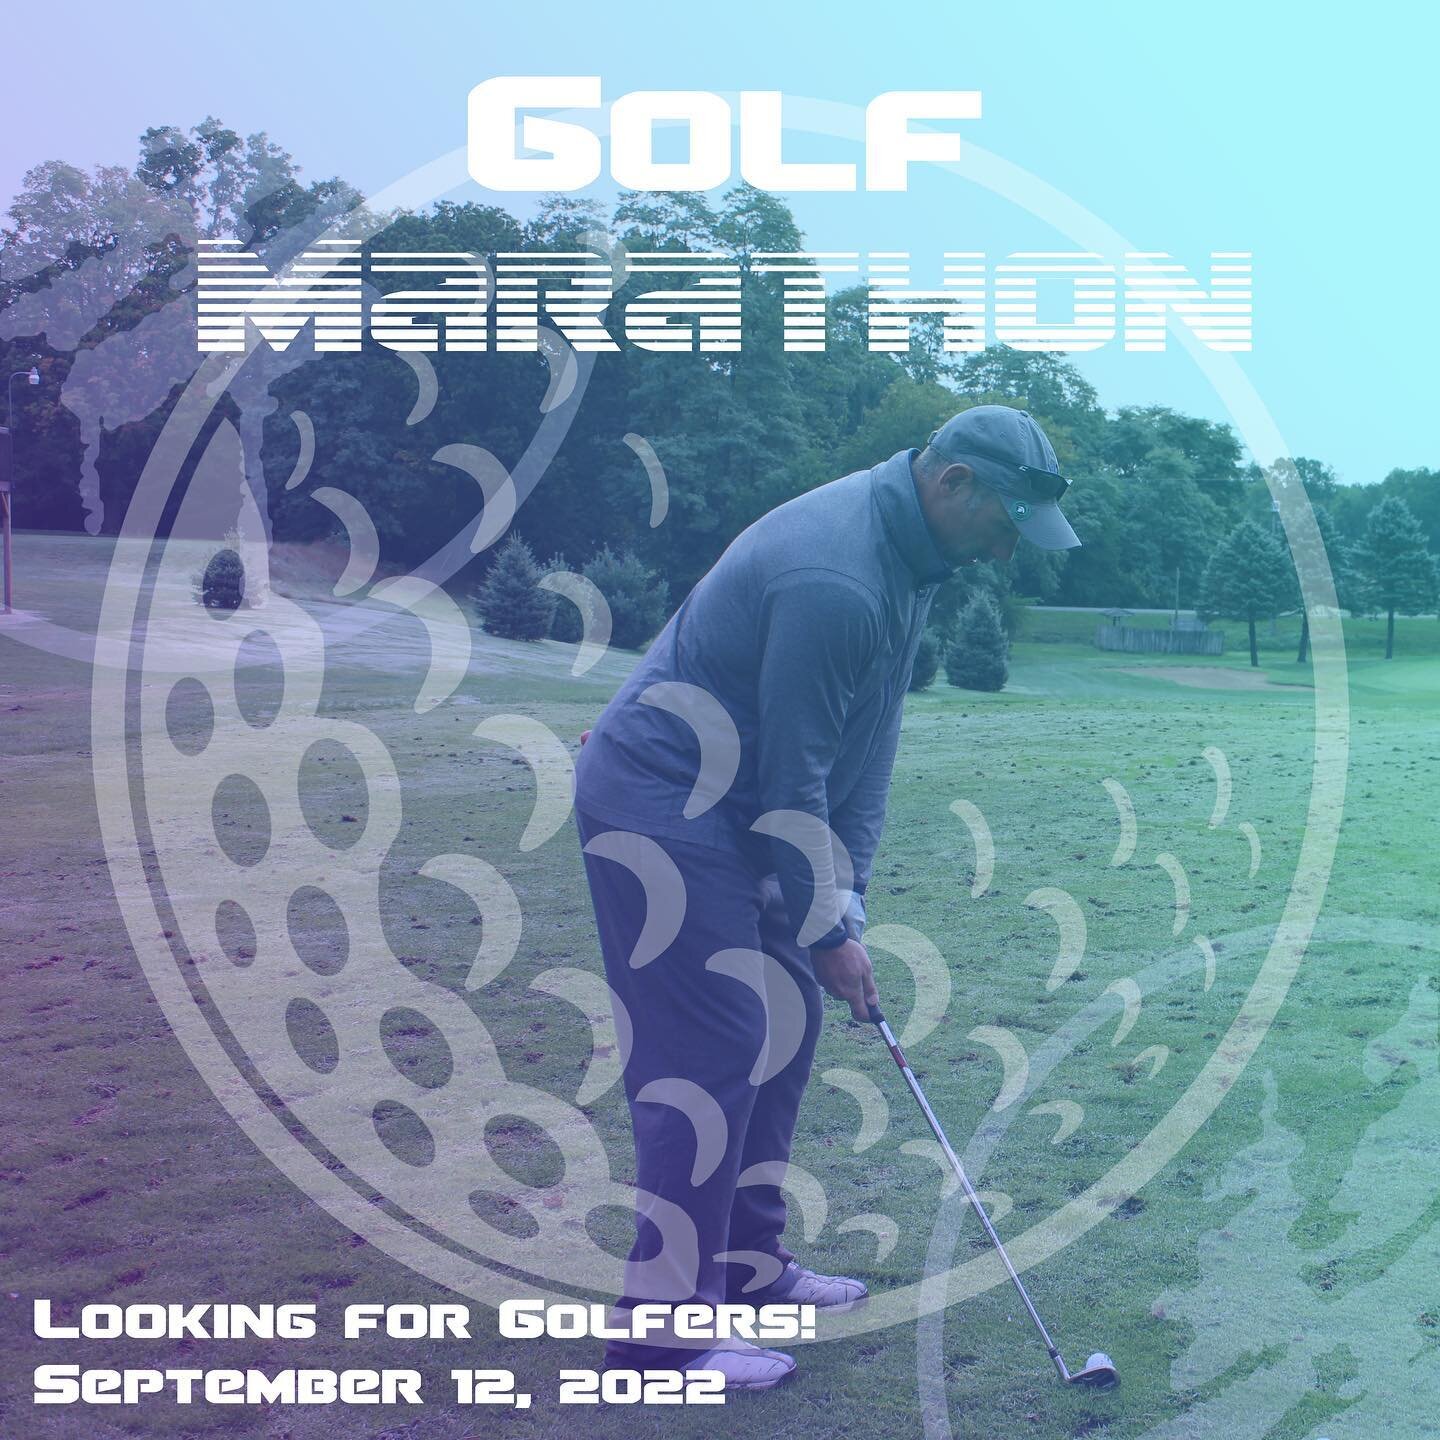 Looking for a way to get involved? We will be hosting our annual Golf Marathon on Monday, September 12 at Orchard Hills. Come golf over 100 holes or sponsor one of our golfers. #GolfMarathon #100